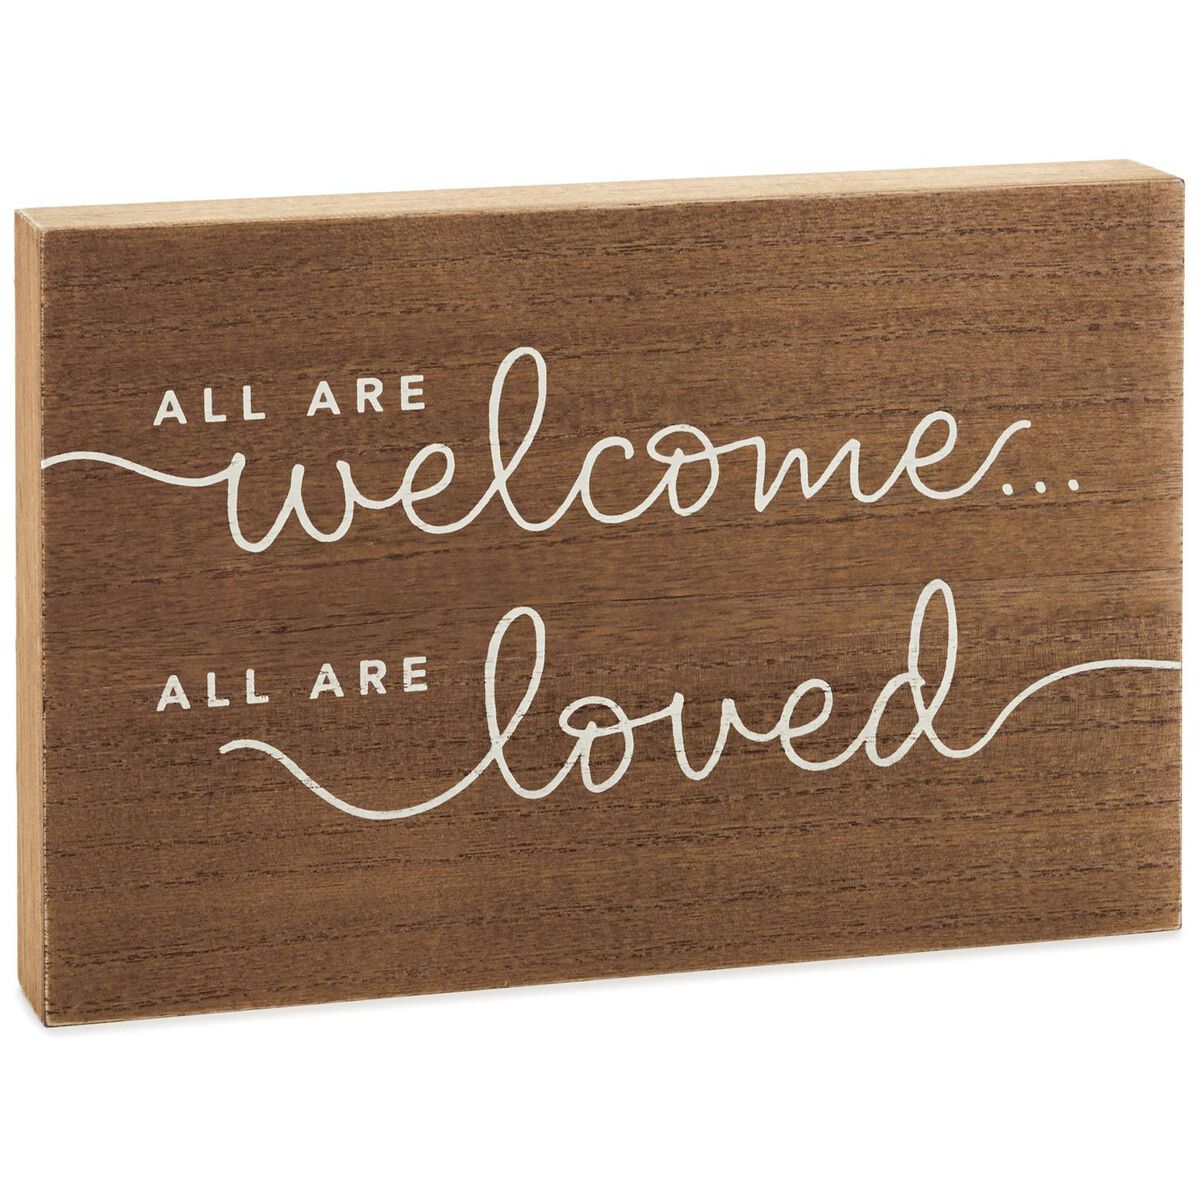 All-Are-Welcome-Wood-Quote-Sign-1175x775-root-1RUS2208_RUS2208_1470_1.jpg_Source_Image.jpg